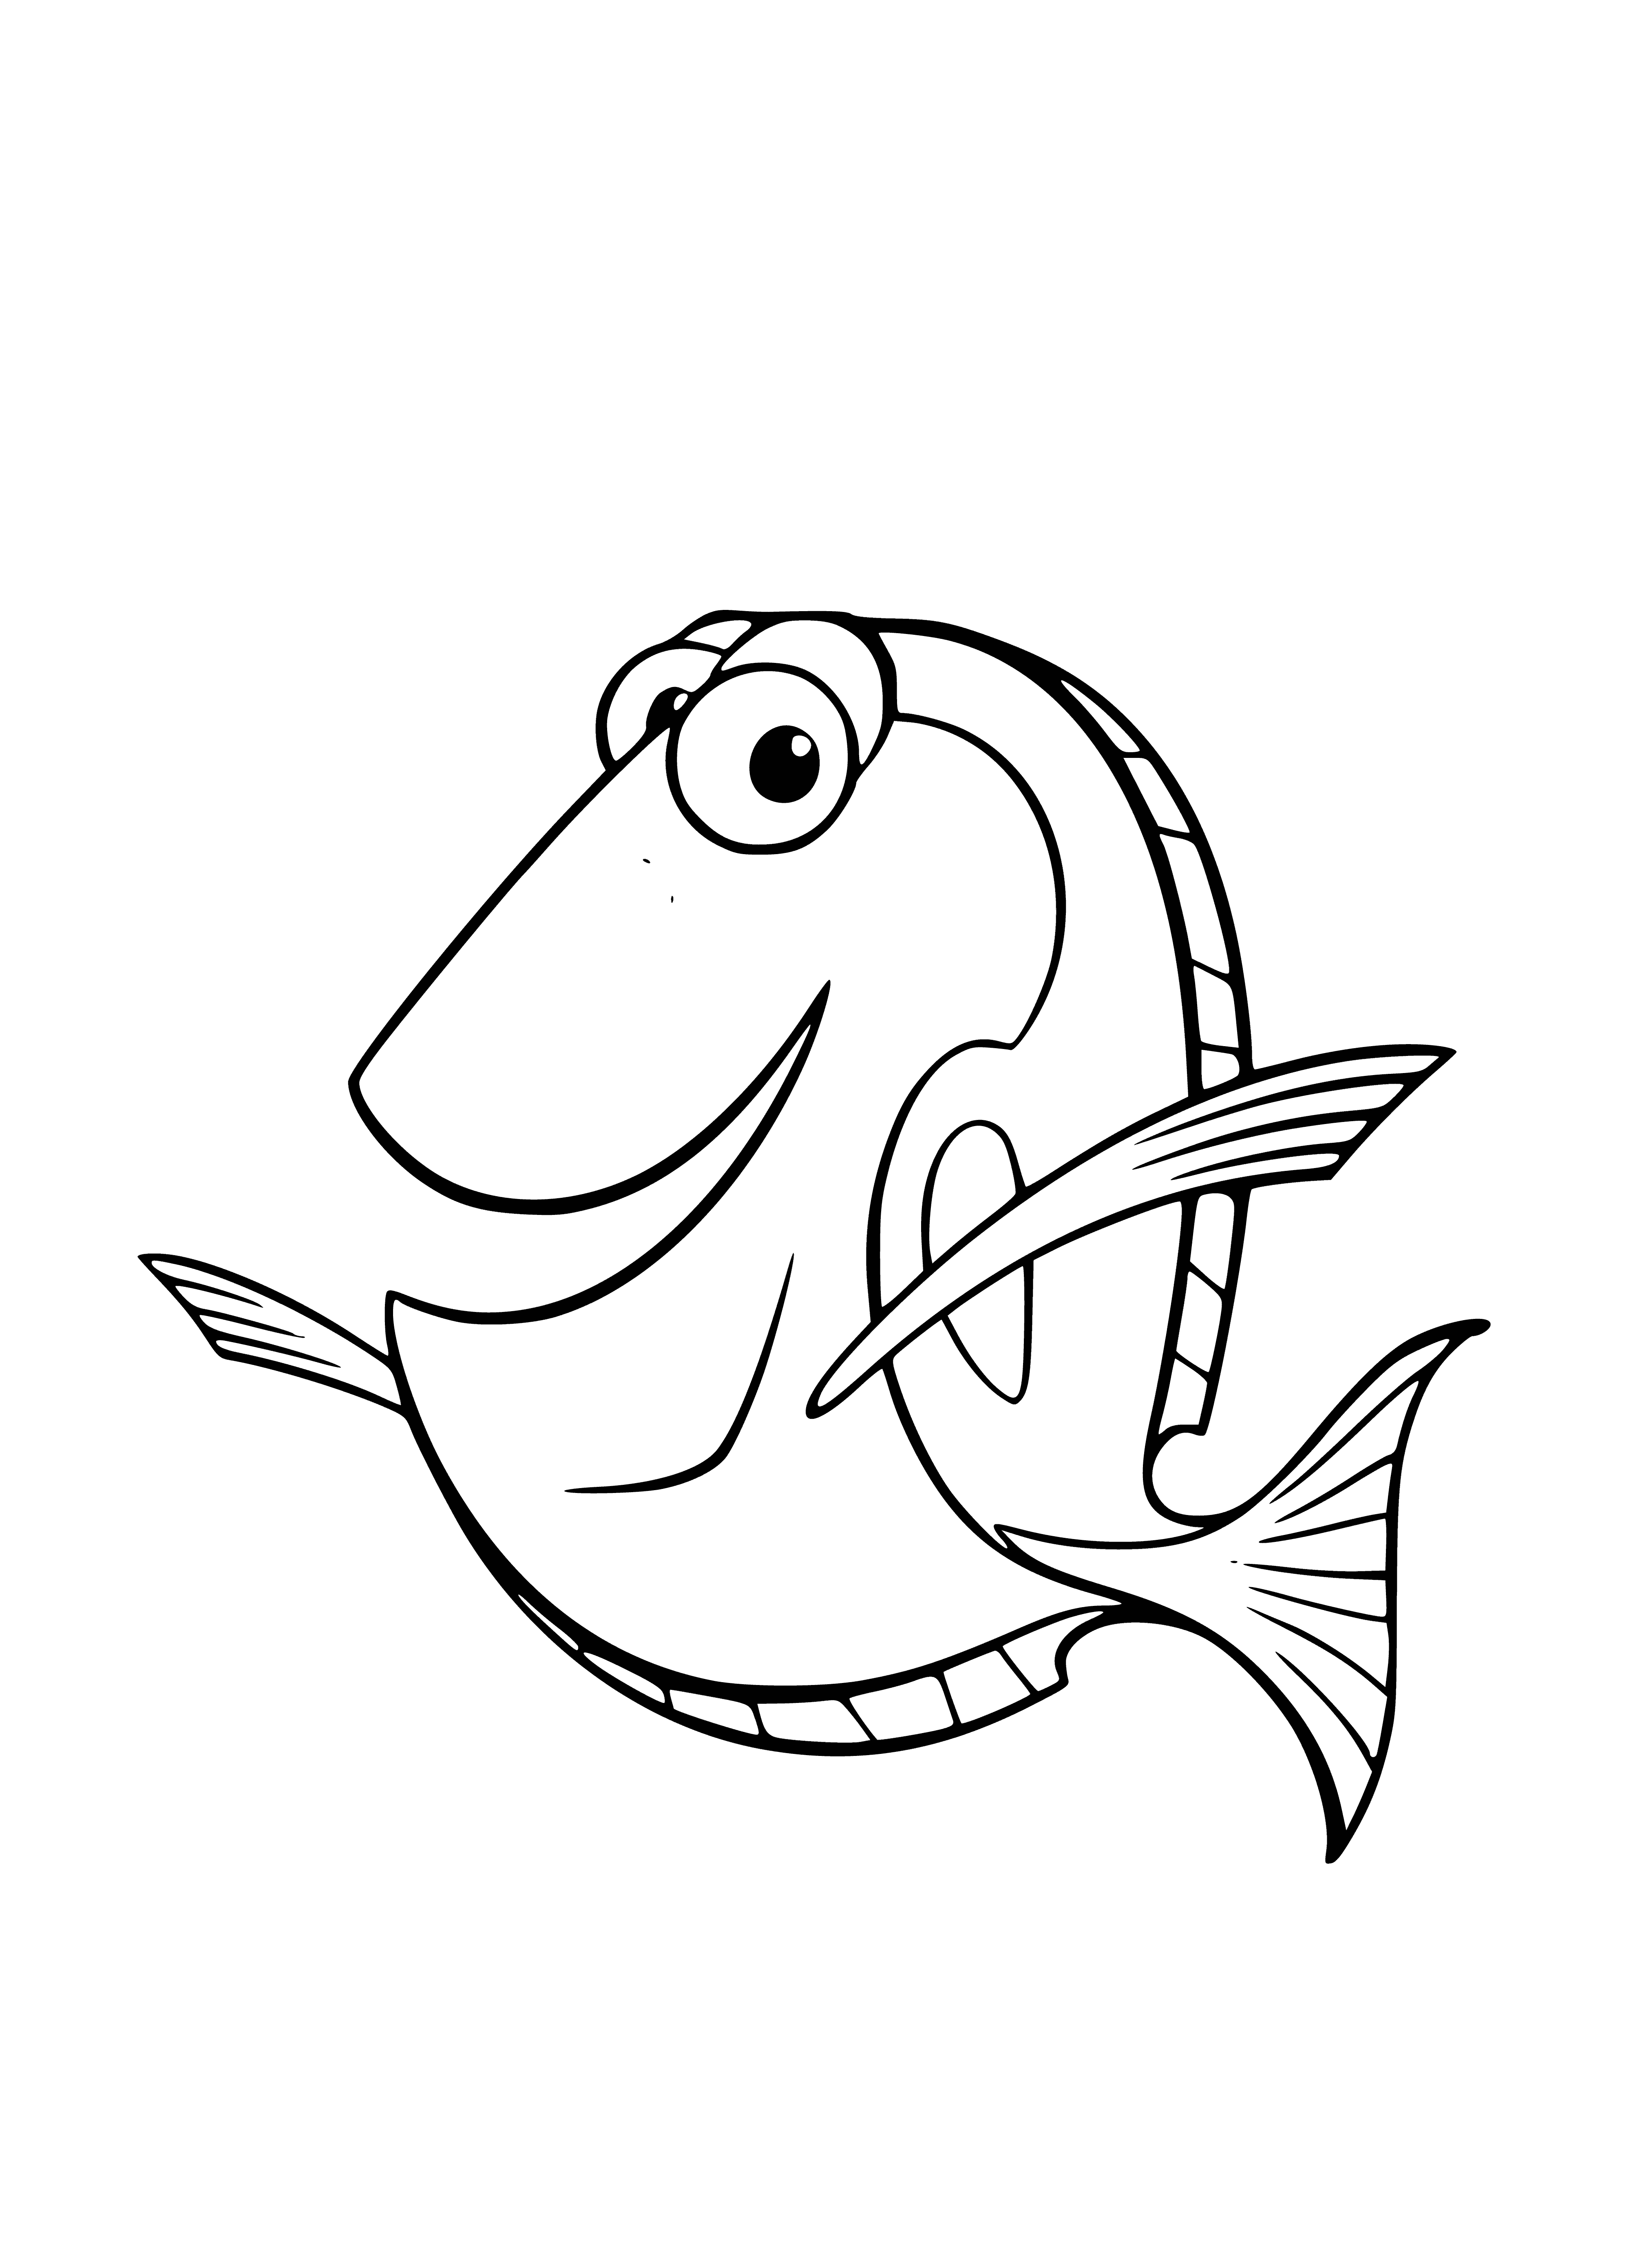 Dory the fish coloring page